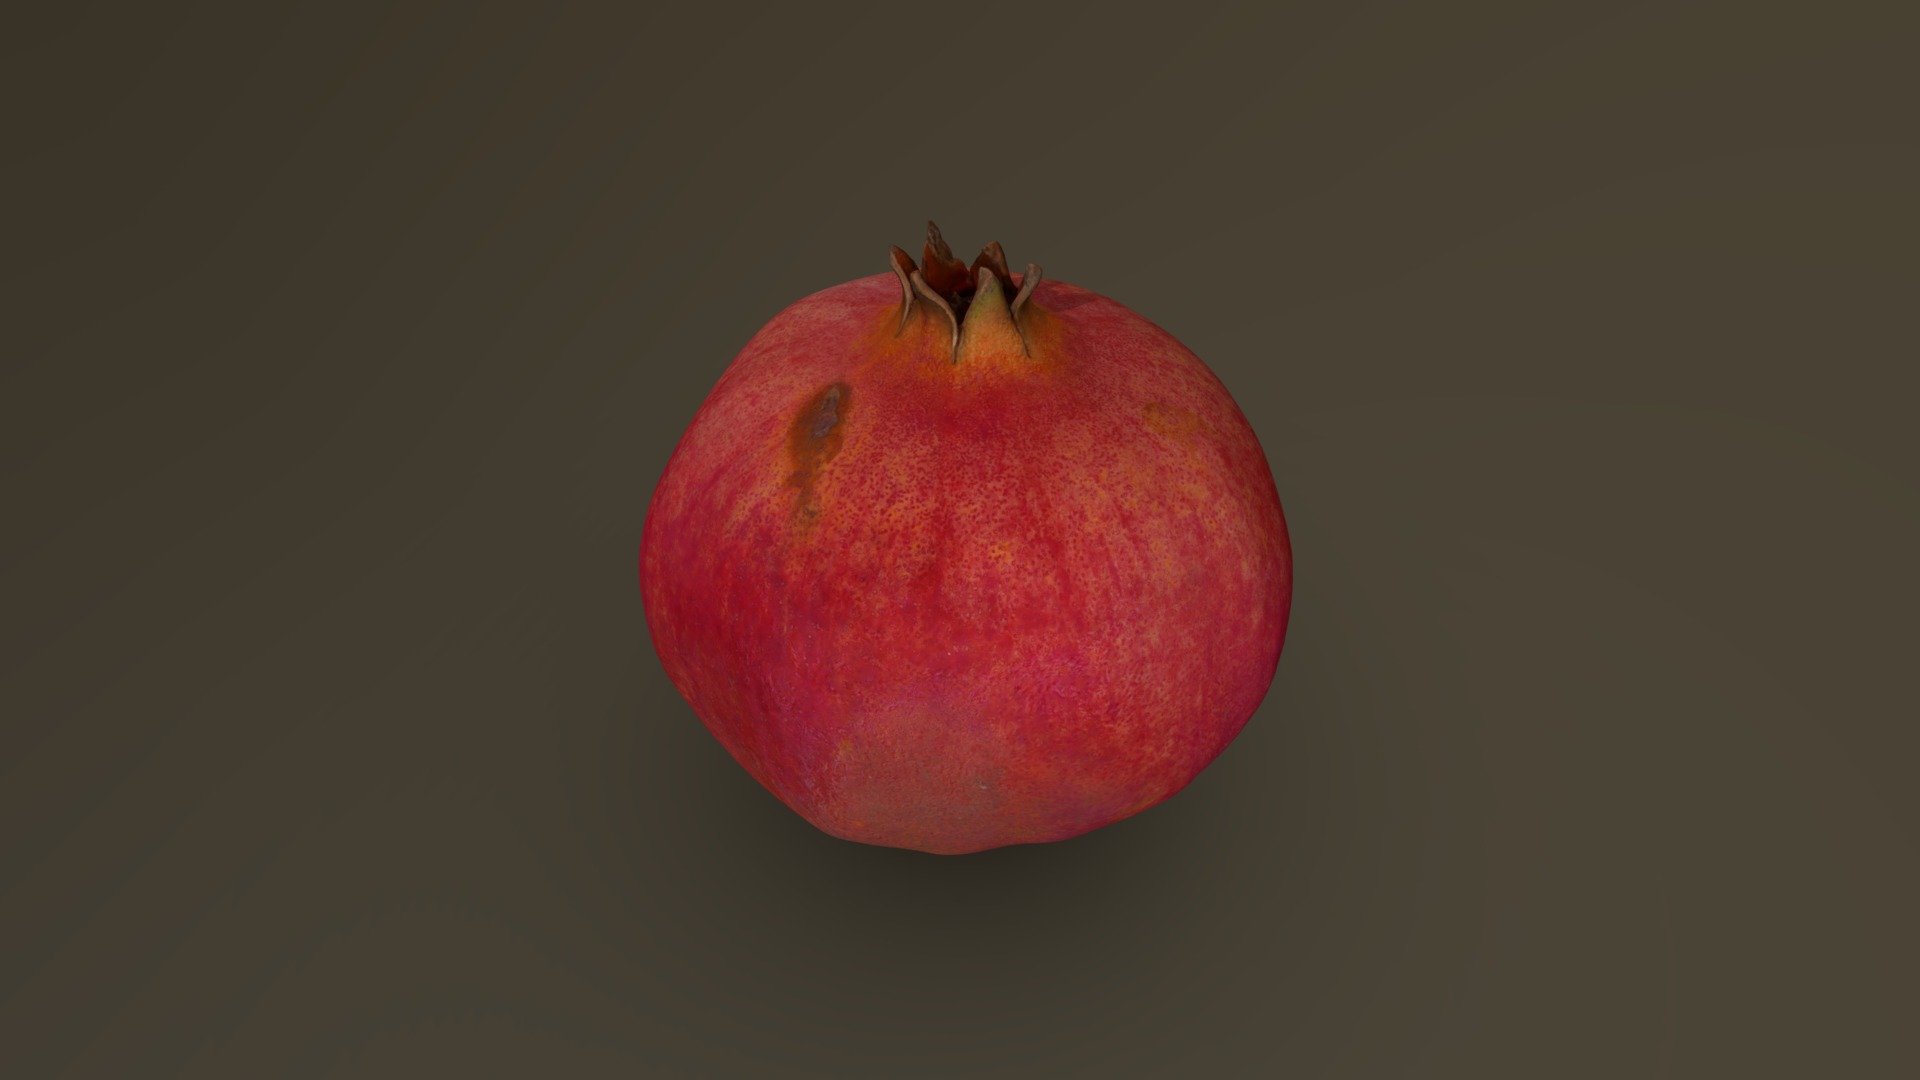 3D model Pomegranate 02 - This is a 3D model of the Pomegranate 02. The 3D model is about a red apple on a black background.